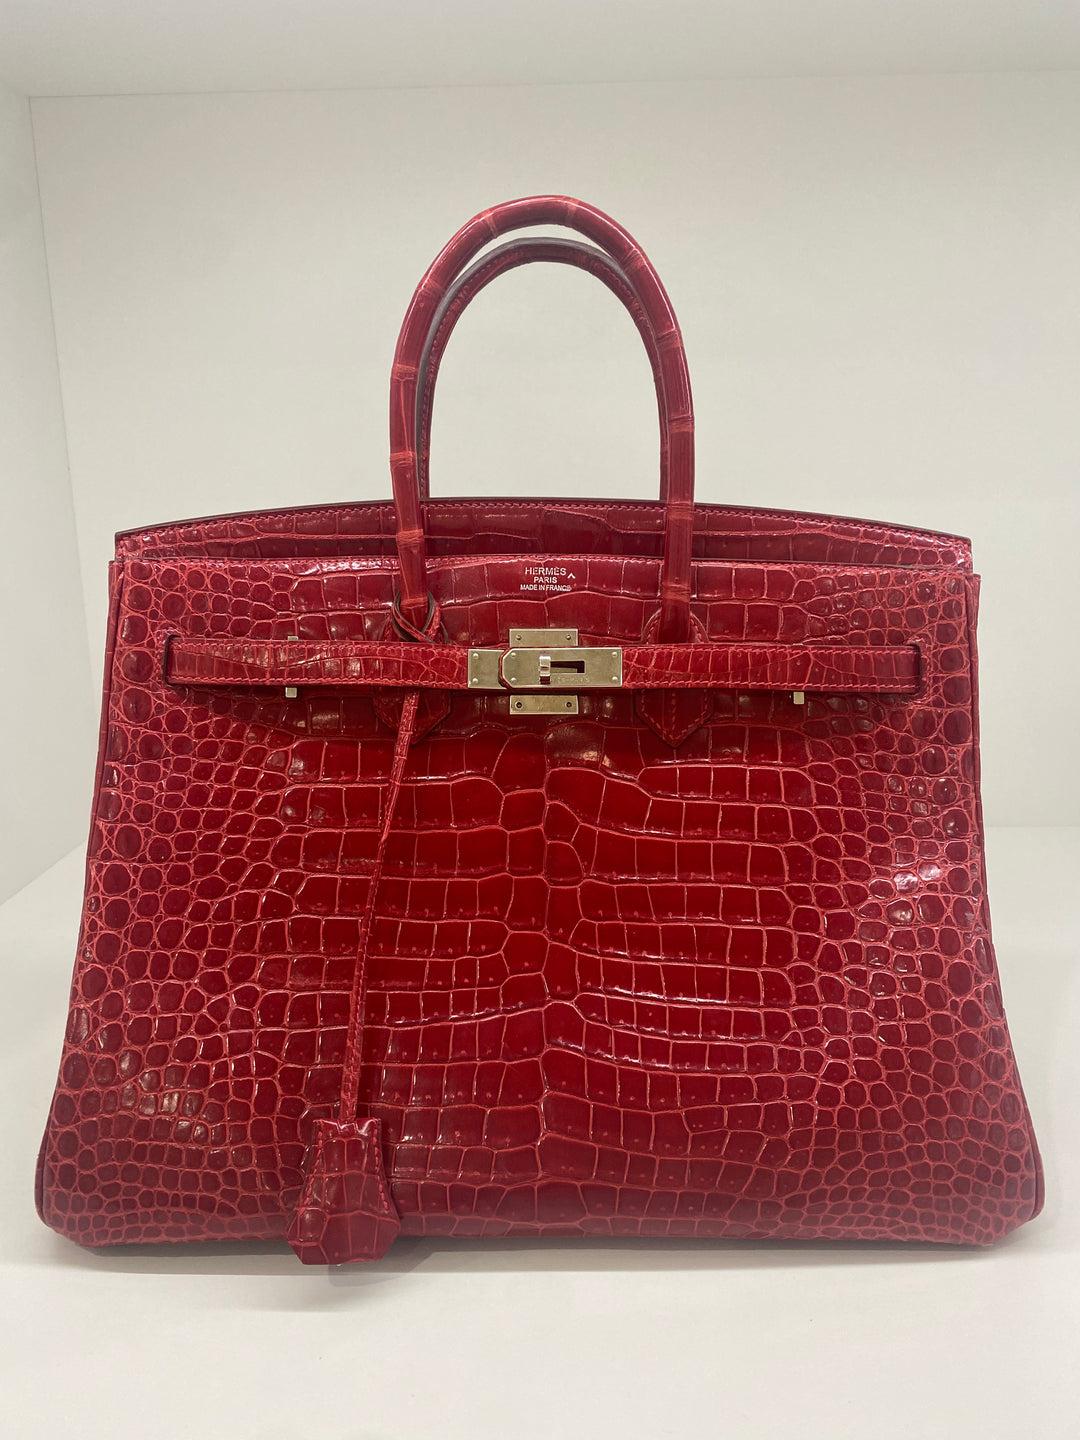 Condition: ﻿Very good used condition

Material: Shiny Alligator

Colour: Red

Hardware: Palladium 

Year: 2011

Inclusion: key & dust bag 

Authenticity: Authenticity Guaranteed or fully refundable

Shipping: Express Shipping Domestic and